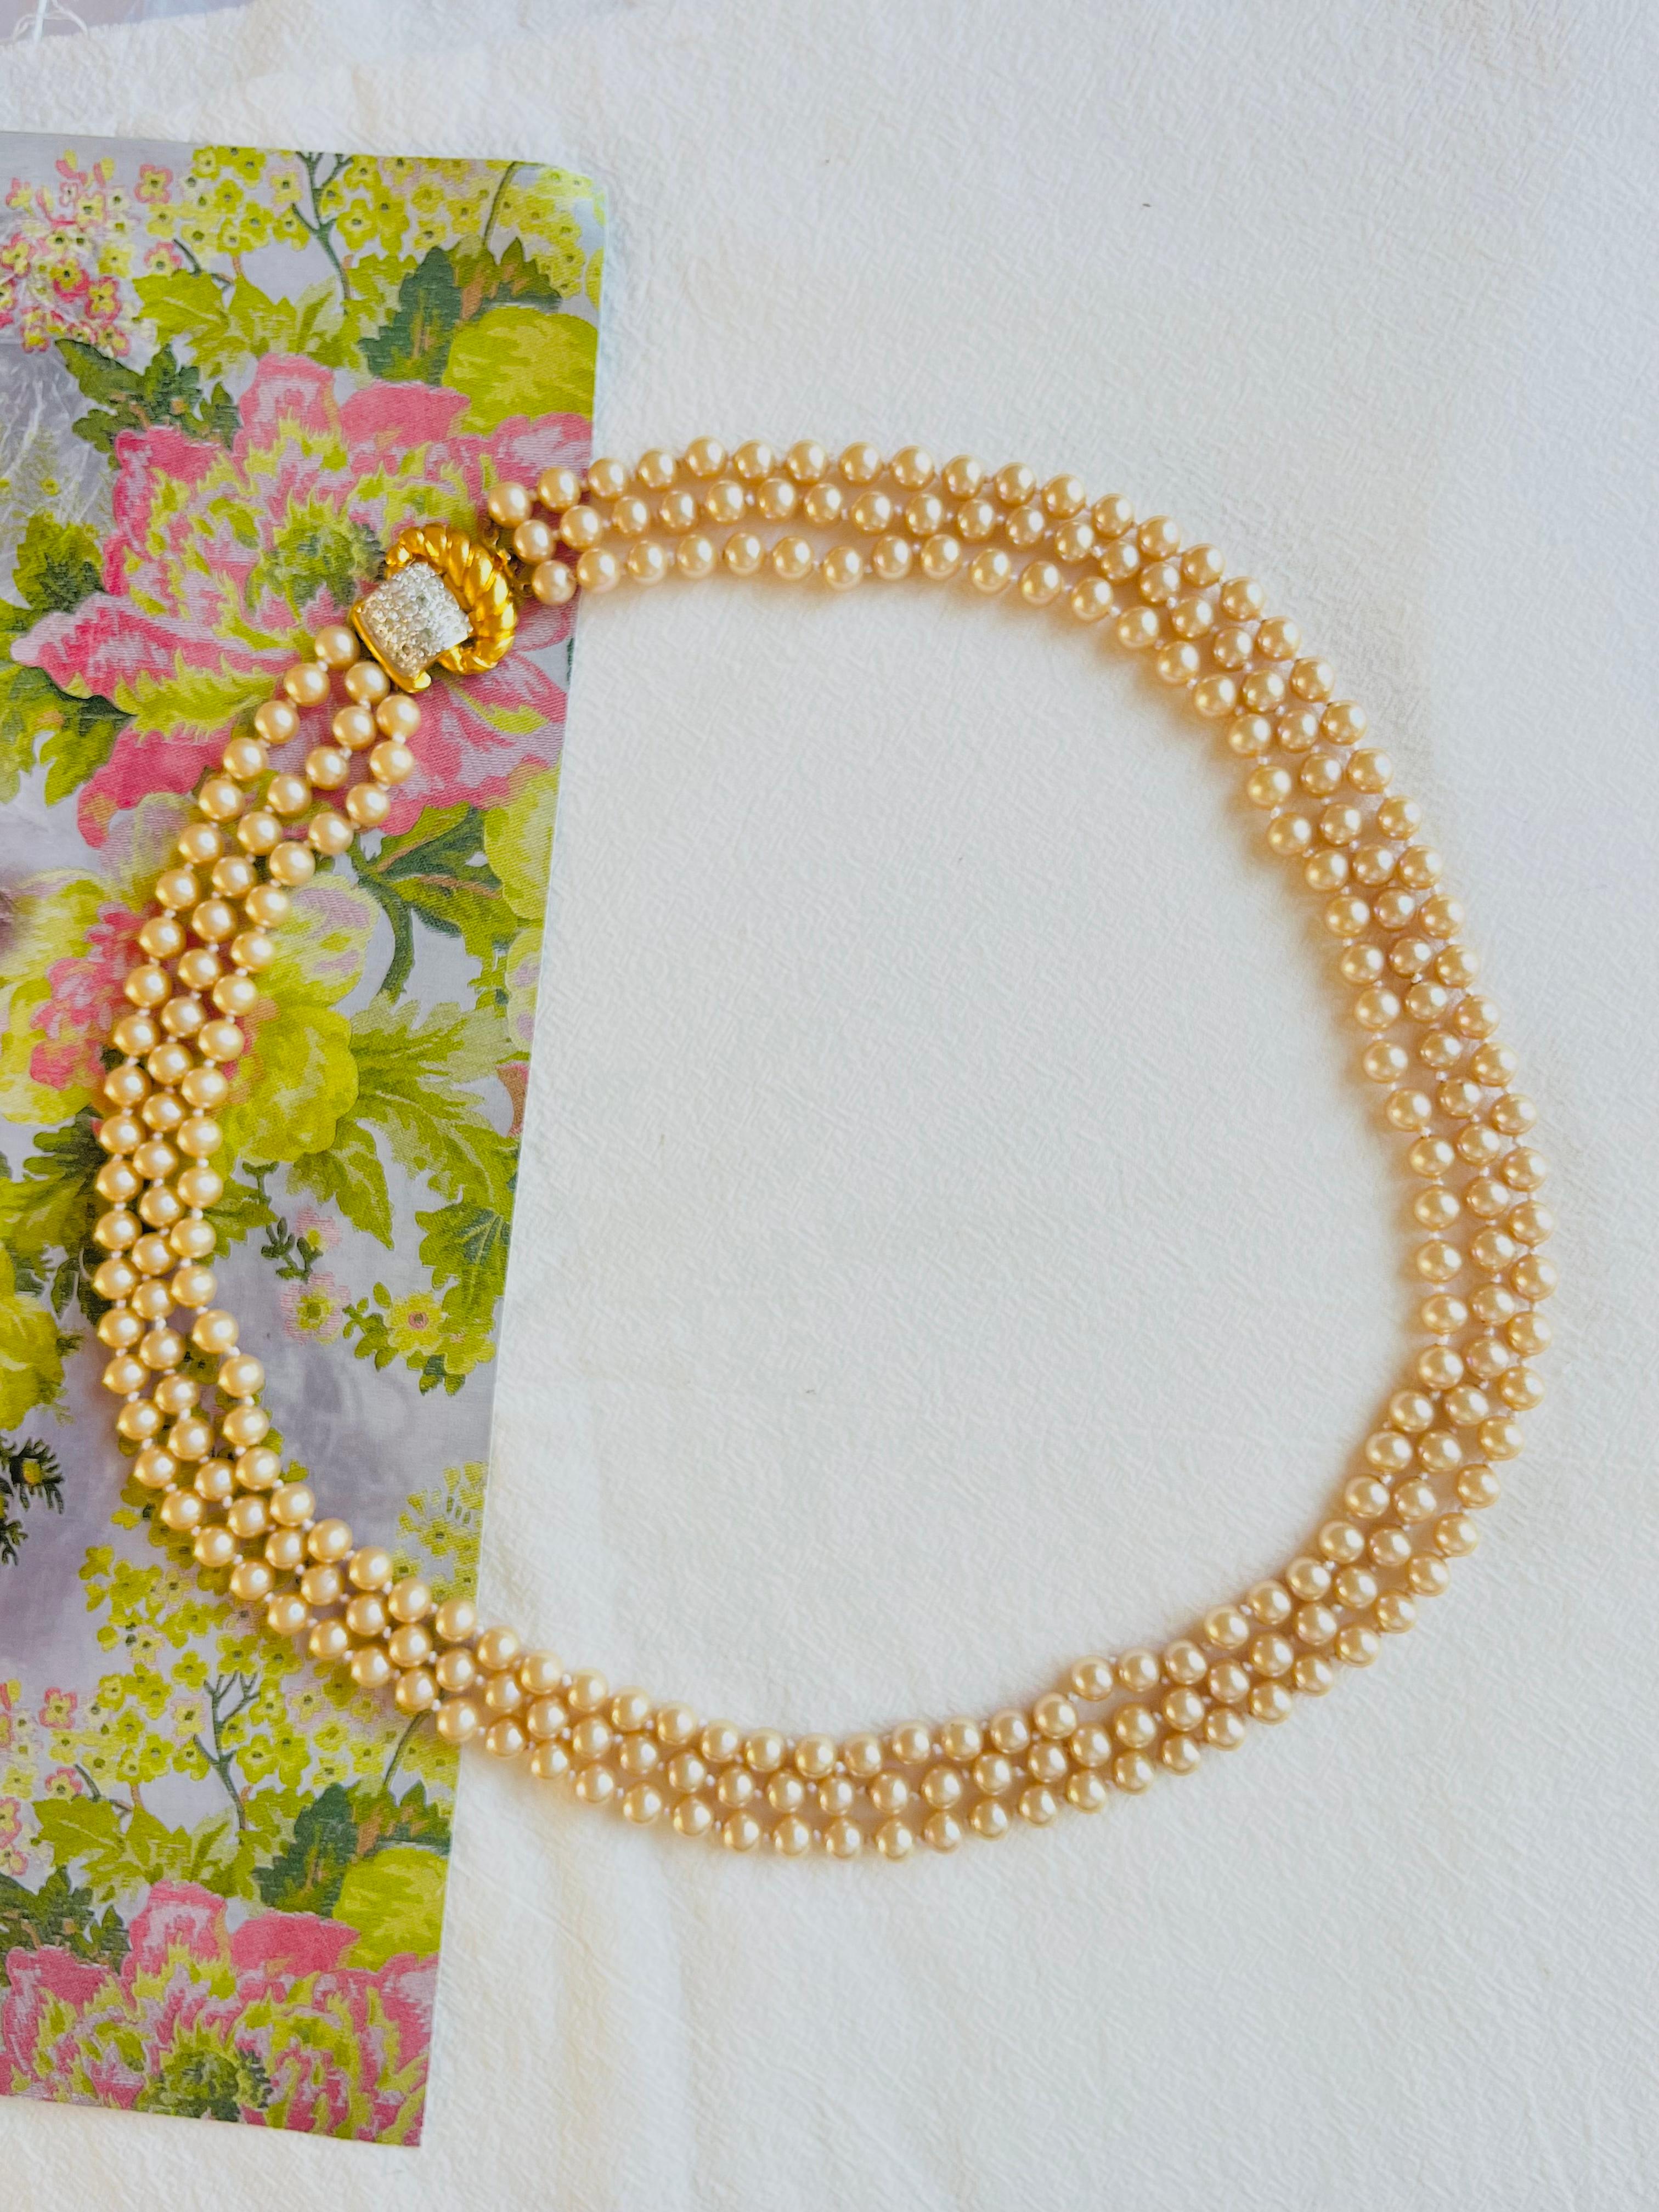 Valentino Garavani Vintage 1980s Golden Pearl Trio Strands Crystal Pendant Long Necklace, Gold Plated

Very excellent condition. Maybe some light scratches, barely noticeable. All stones are attached, some of shine off.

Very versatile. Decorating